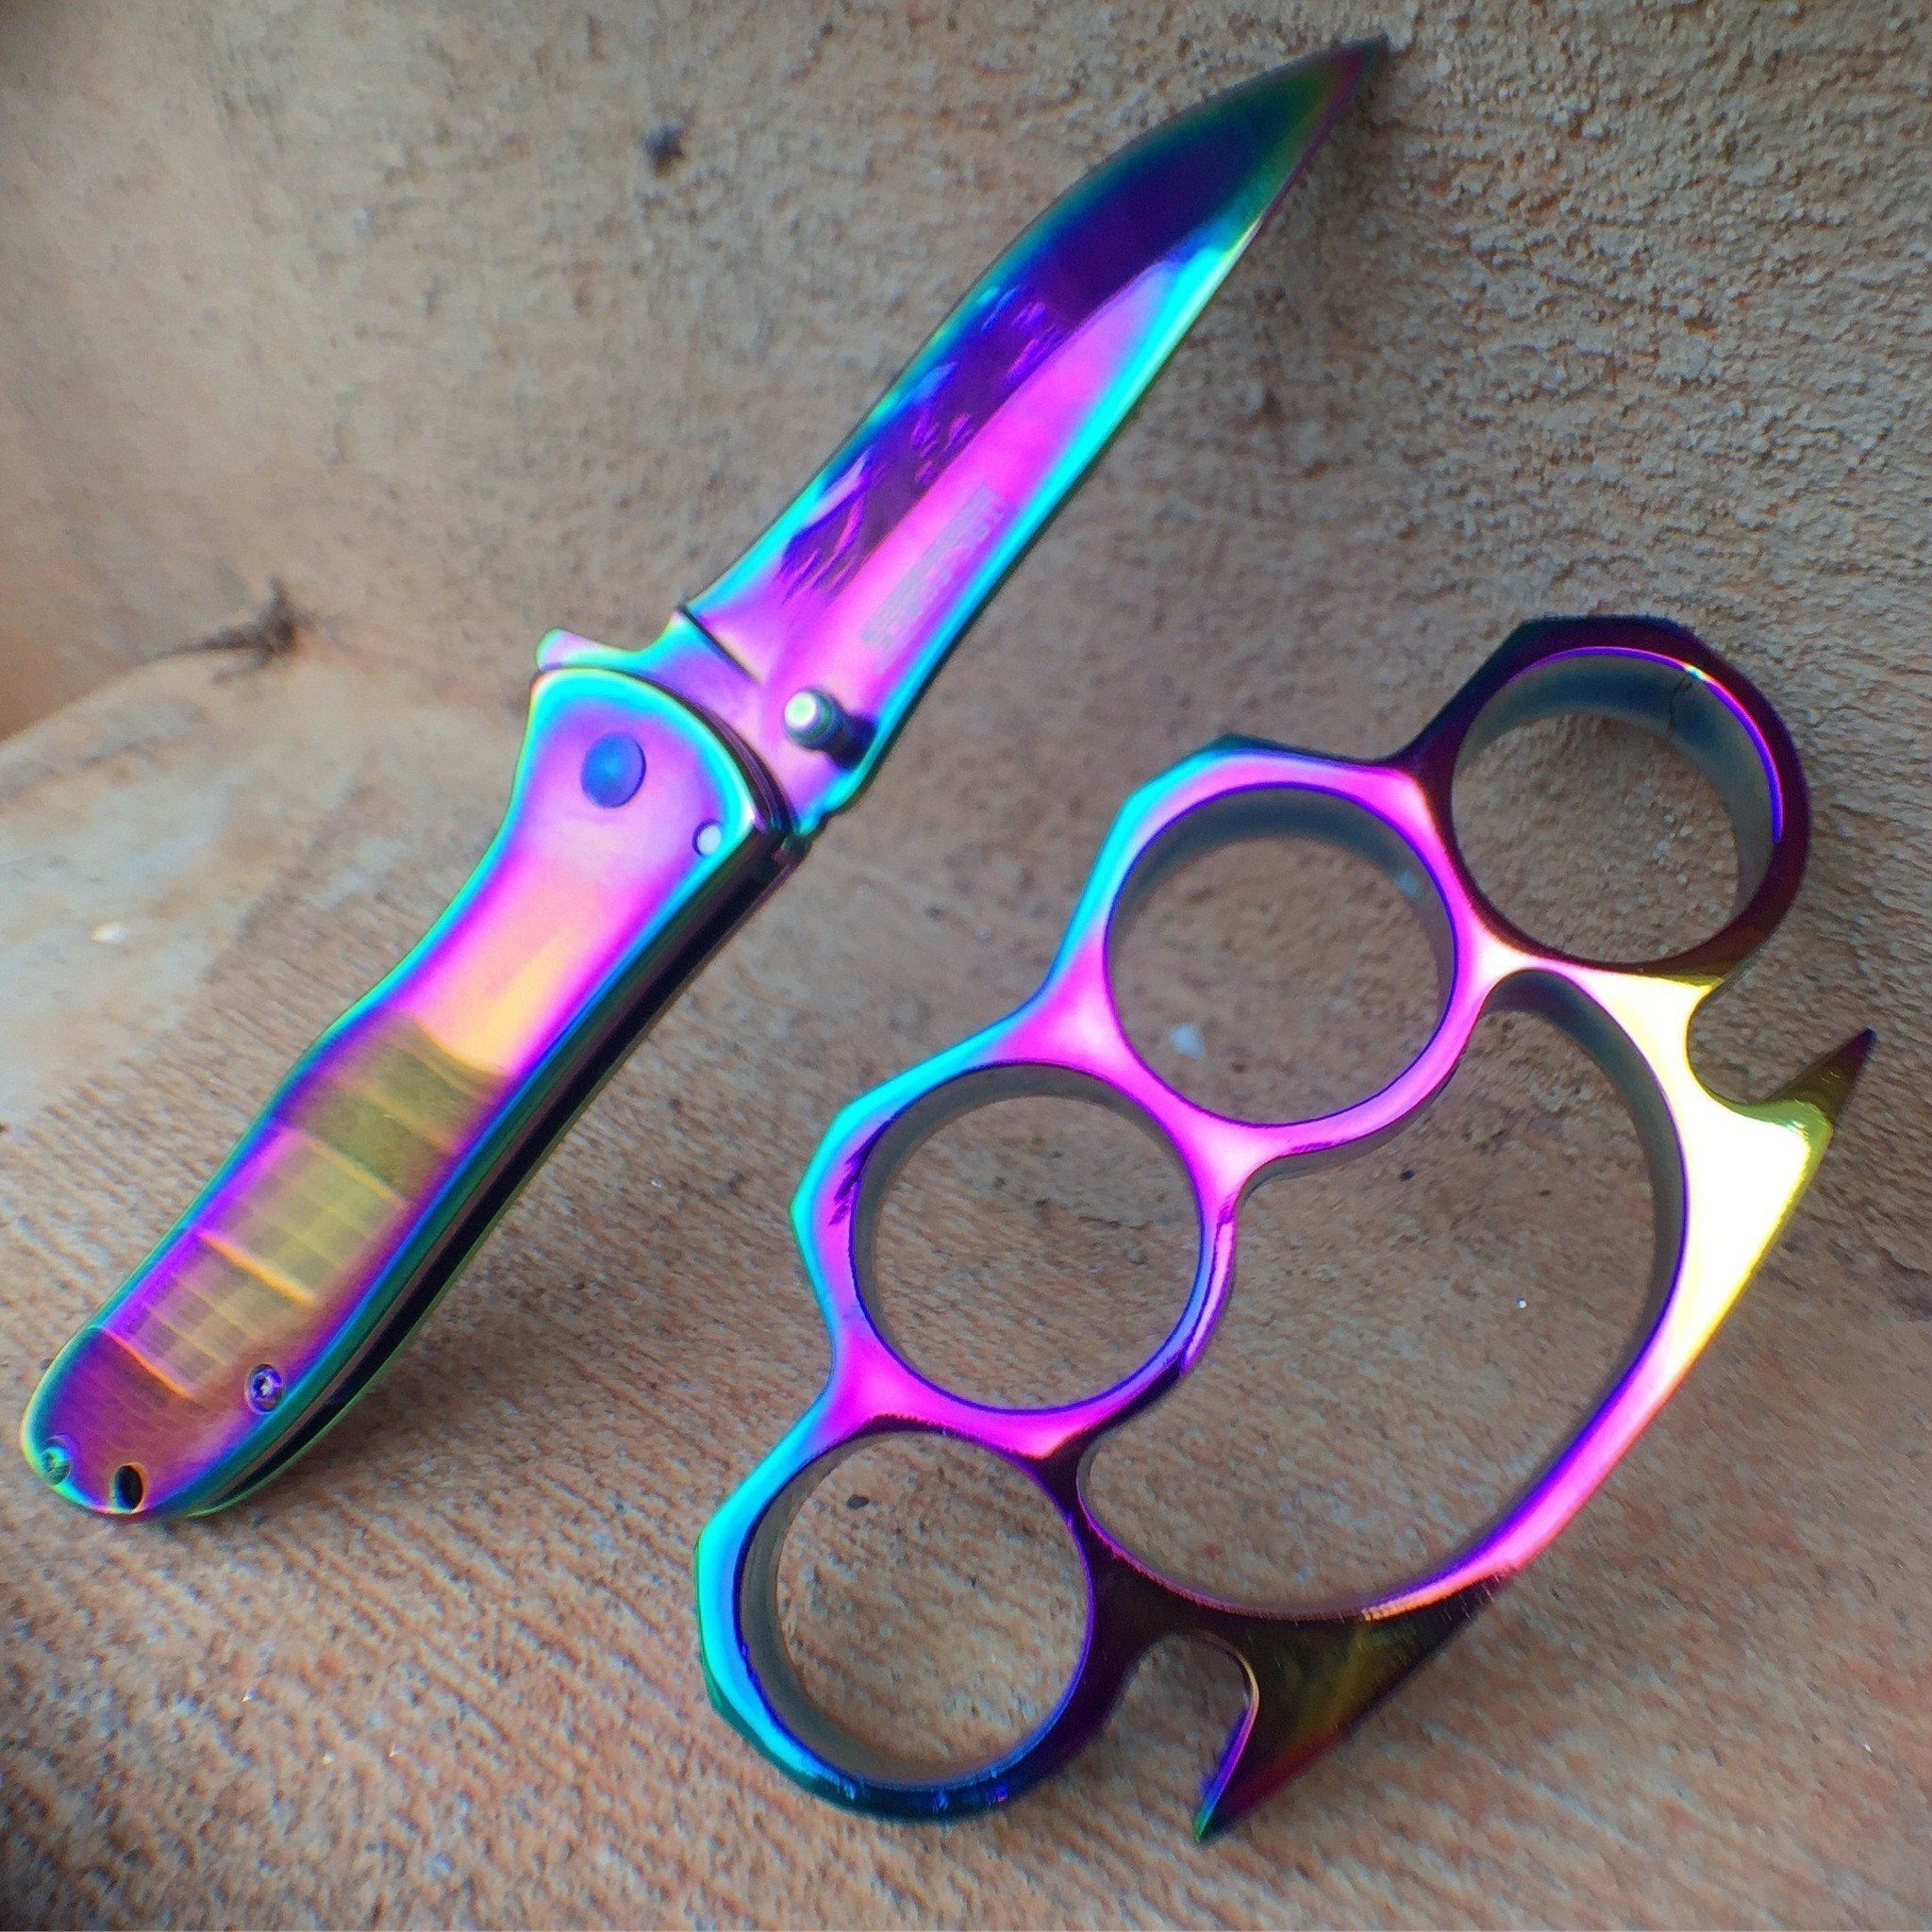 Standard Rainbow Knife - Blades For Babes Spring Assisted